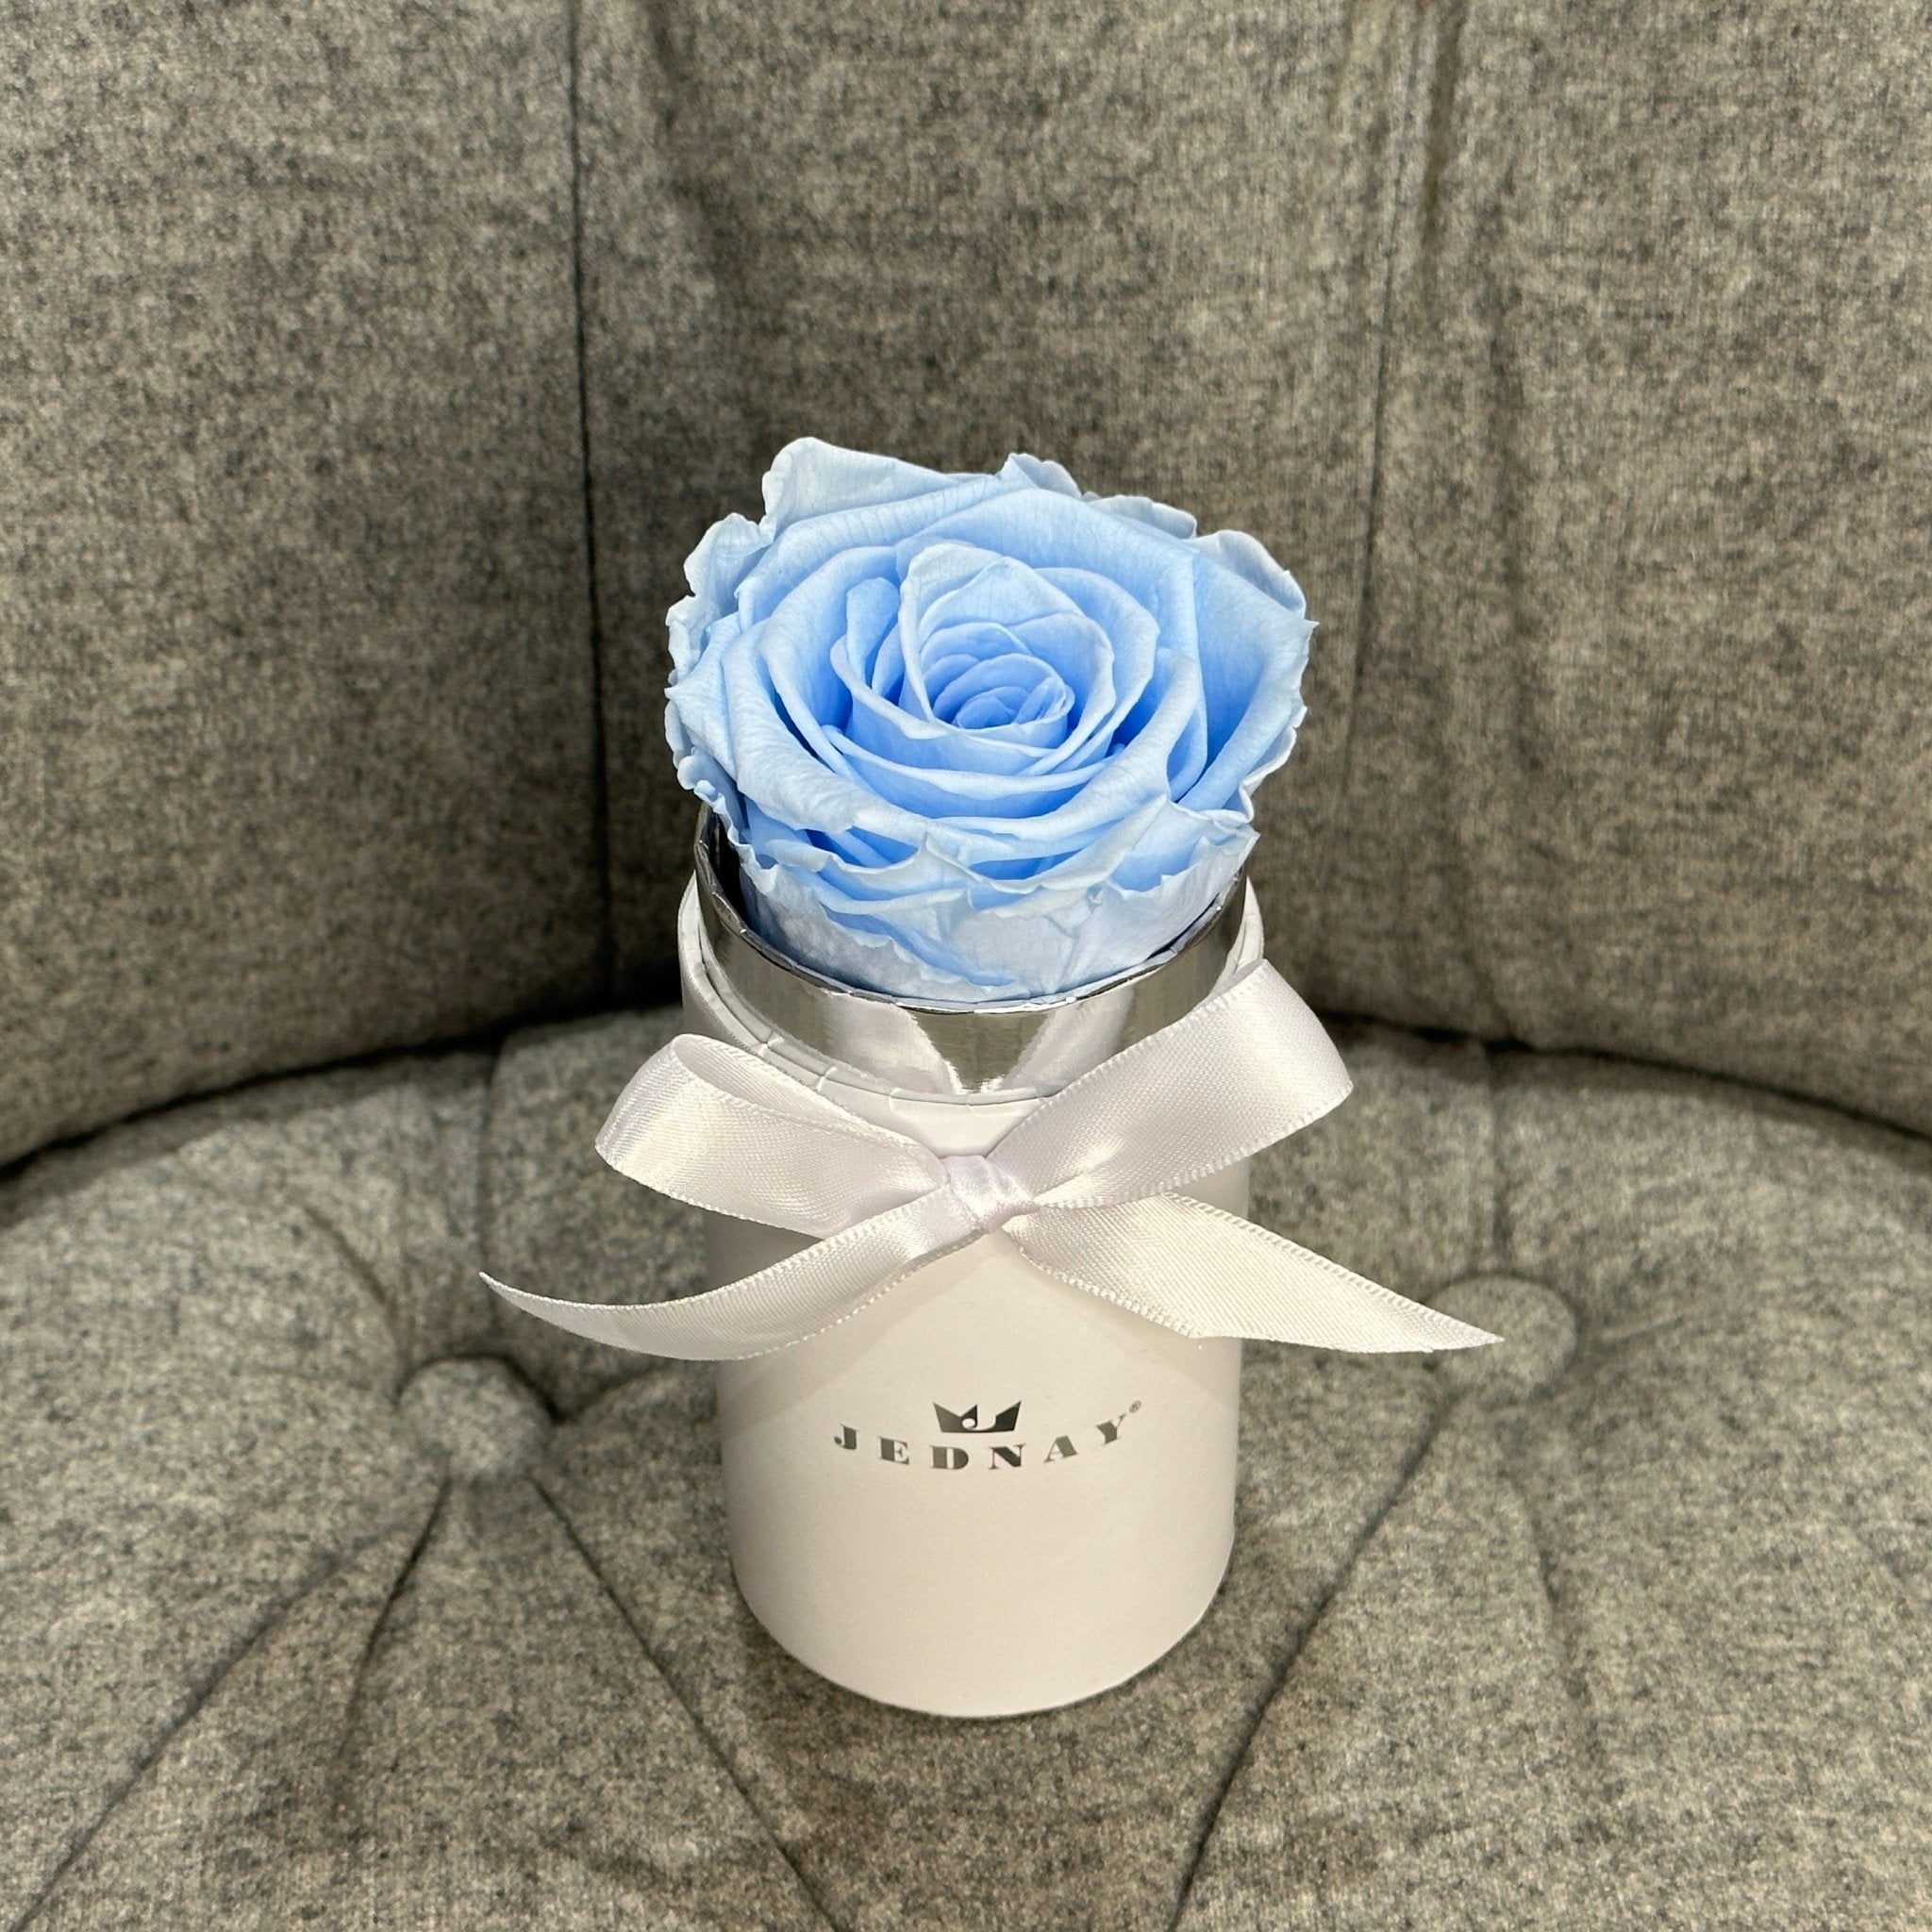 The Uno - Sky Blue Eternal Rose - Classic White Box - Jednay Roses